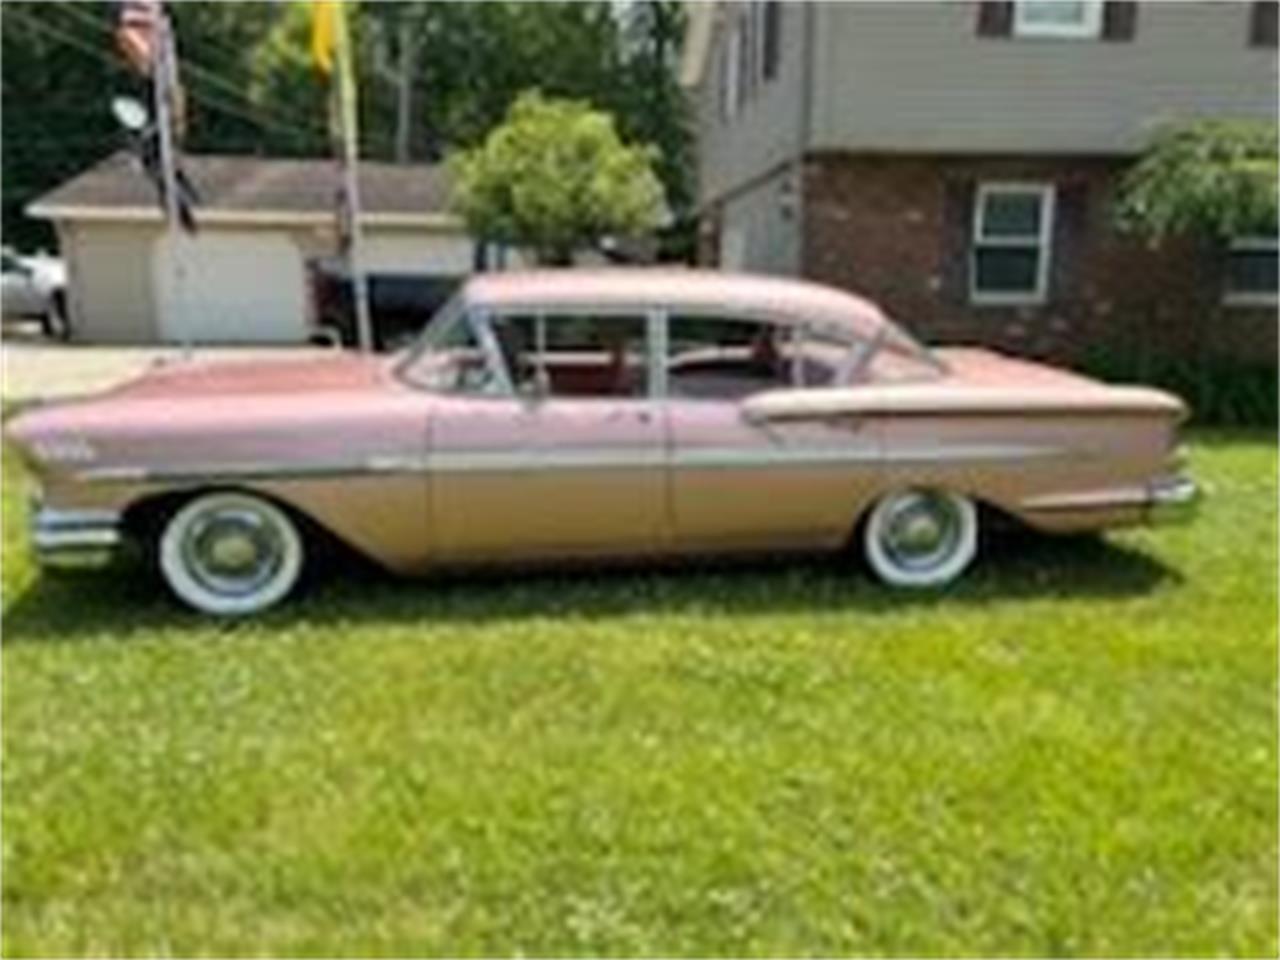 For Sale: 1958 Chevrolet Bel Air in Cadillac, Michigan for sale in Cadillac, MI